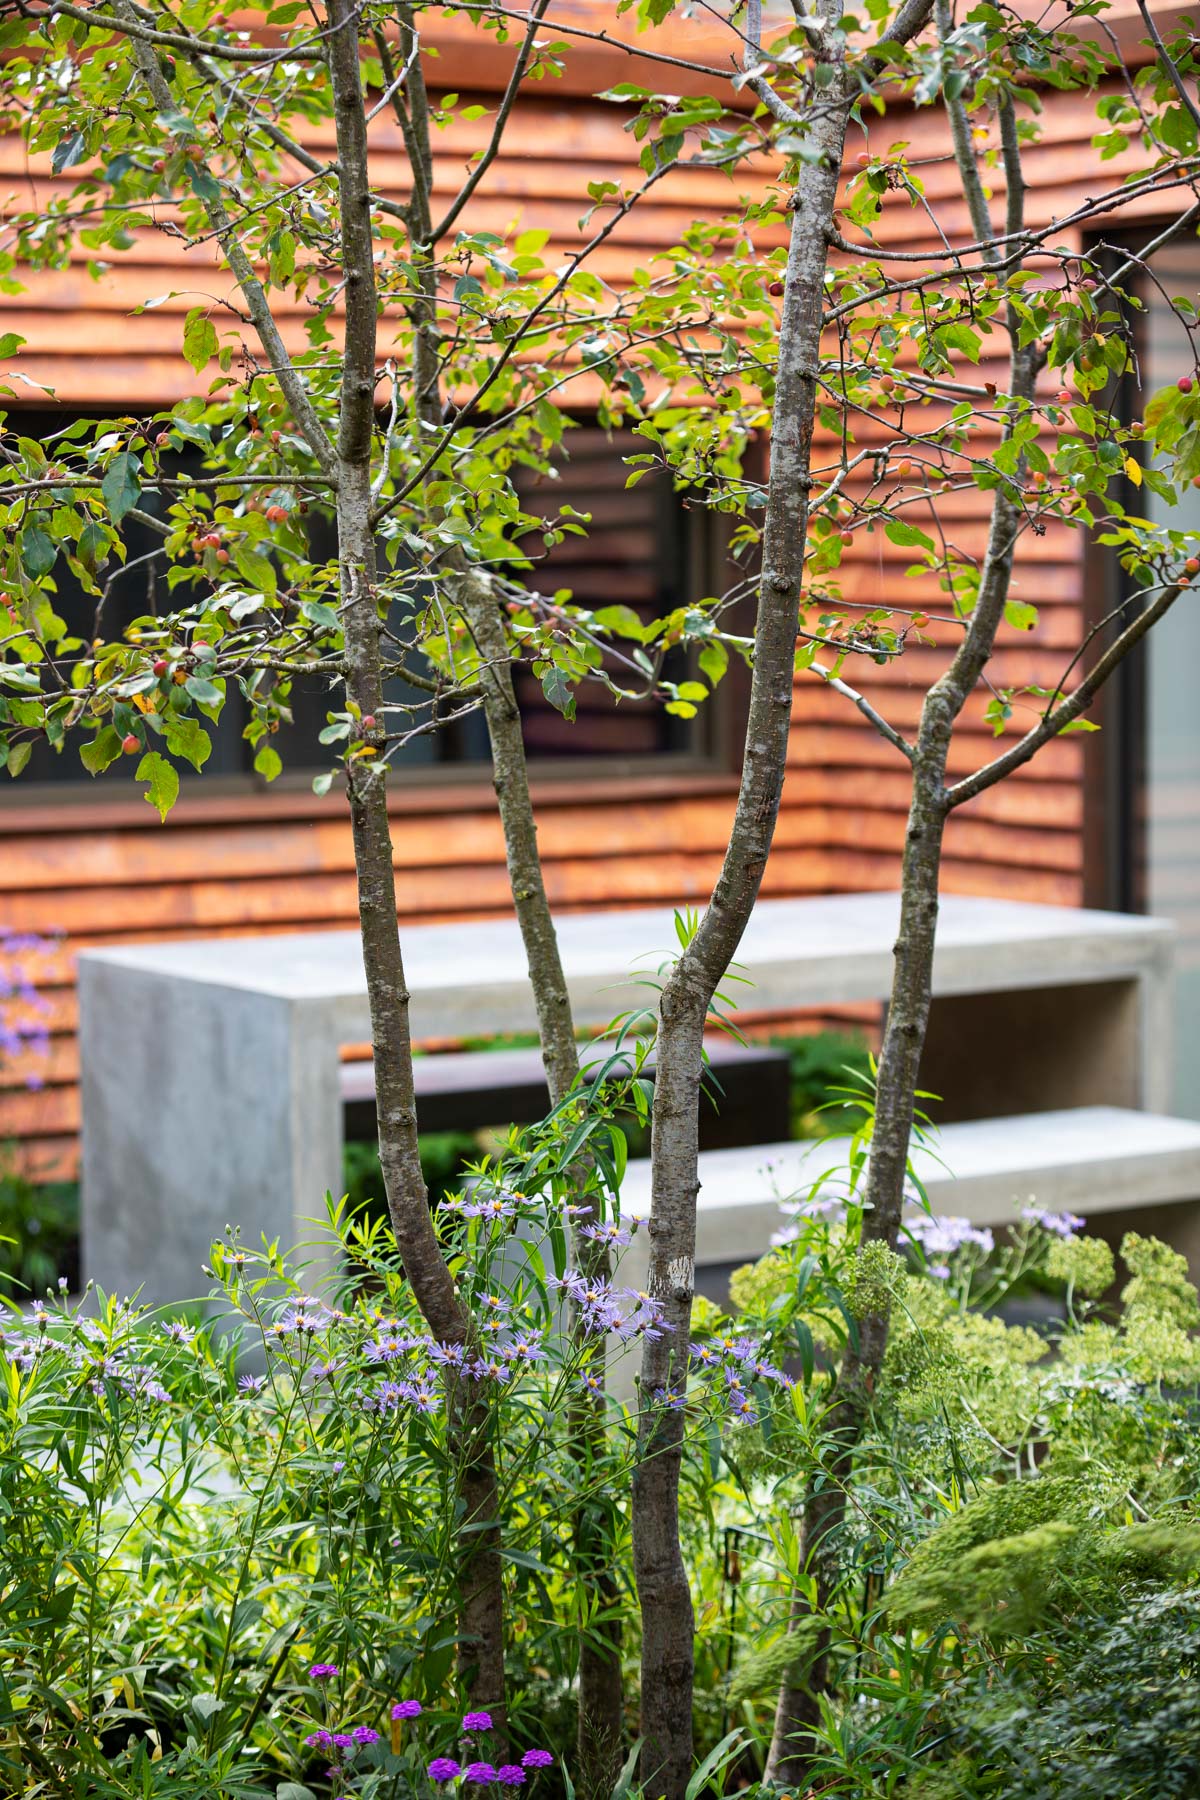 News update on Colm Joseph Cambridge garden design featured on BBC Two's Your Garden Made Perfect, image showing naturalistic perennial planting, multi-stem crab apple tree with views through to concrete table and benches